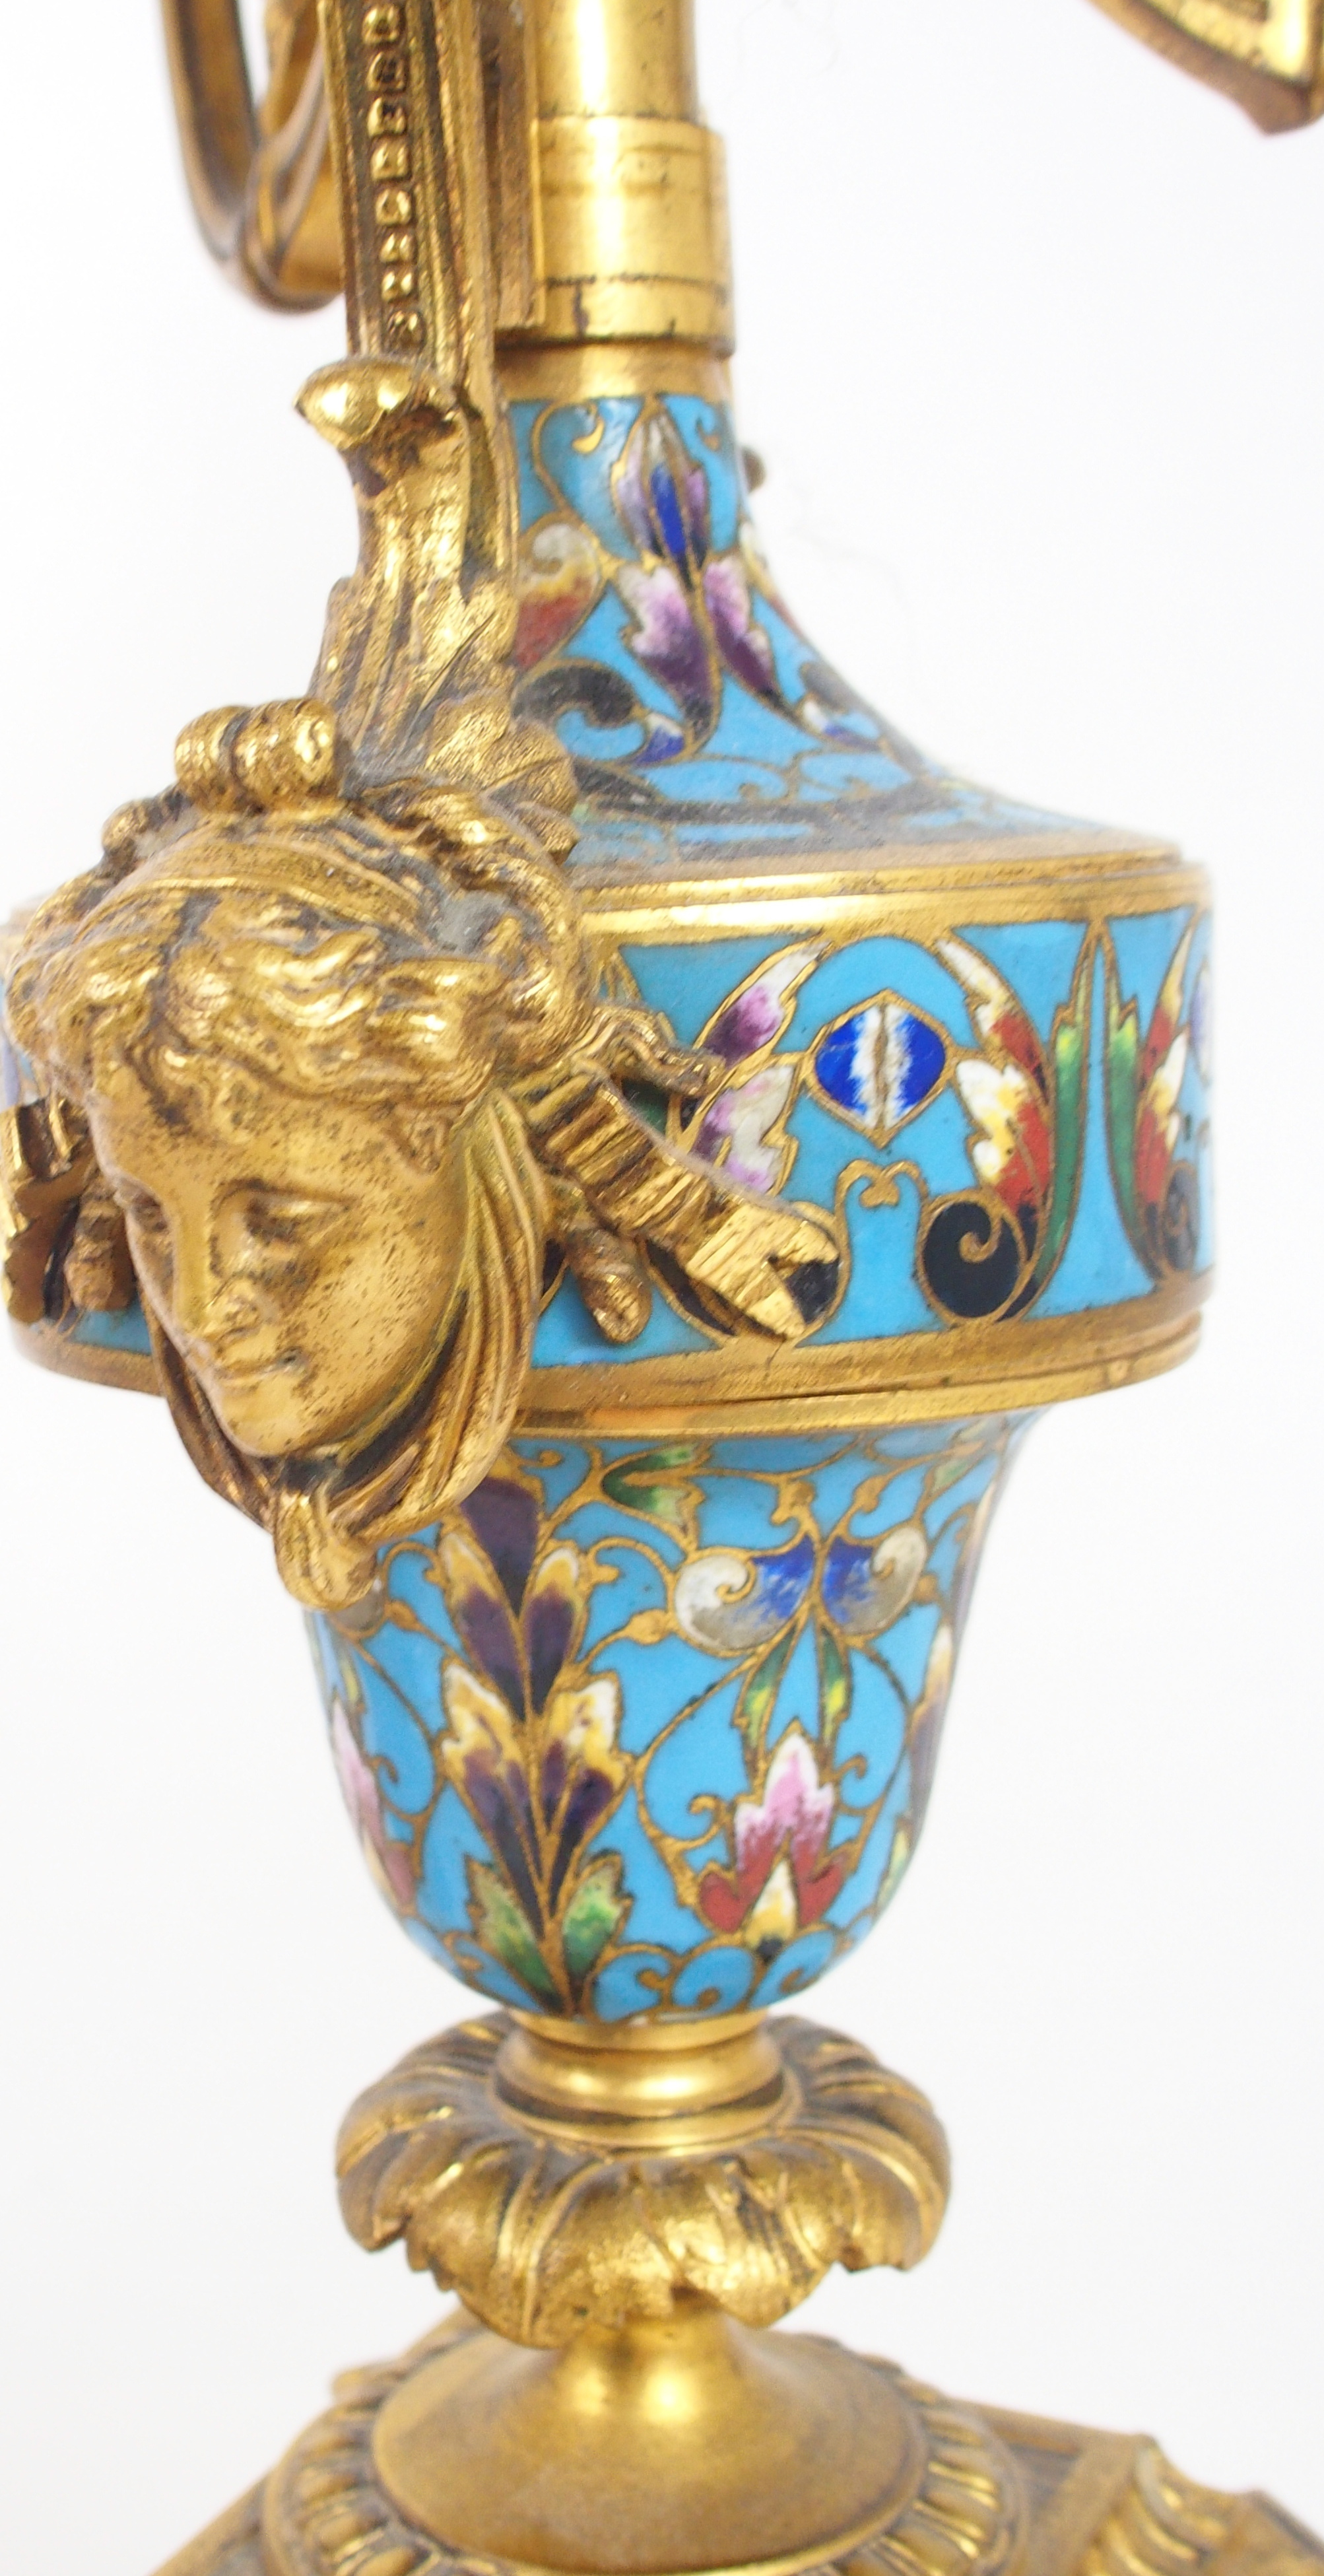 AN IMPRESSIVE 19TH CENTURY FRENCH CHAMPLEVE ENAMEL MANTLE CLOCK the urn mounted top with griffin han - Image 13 of 15